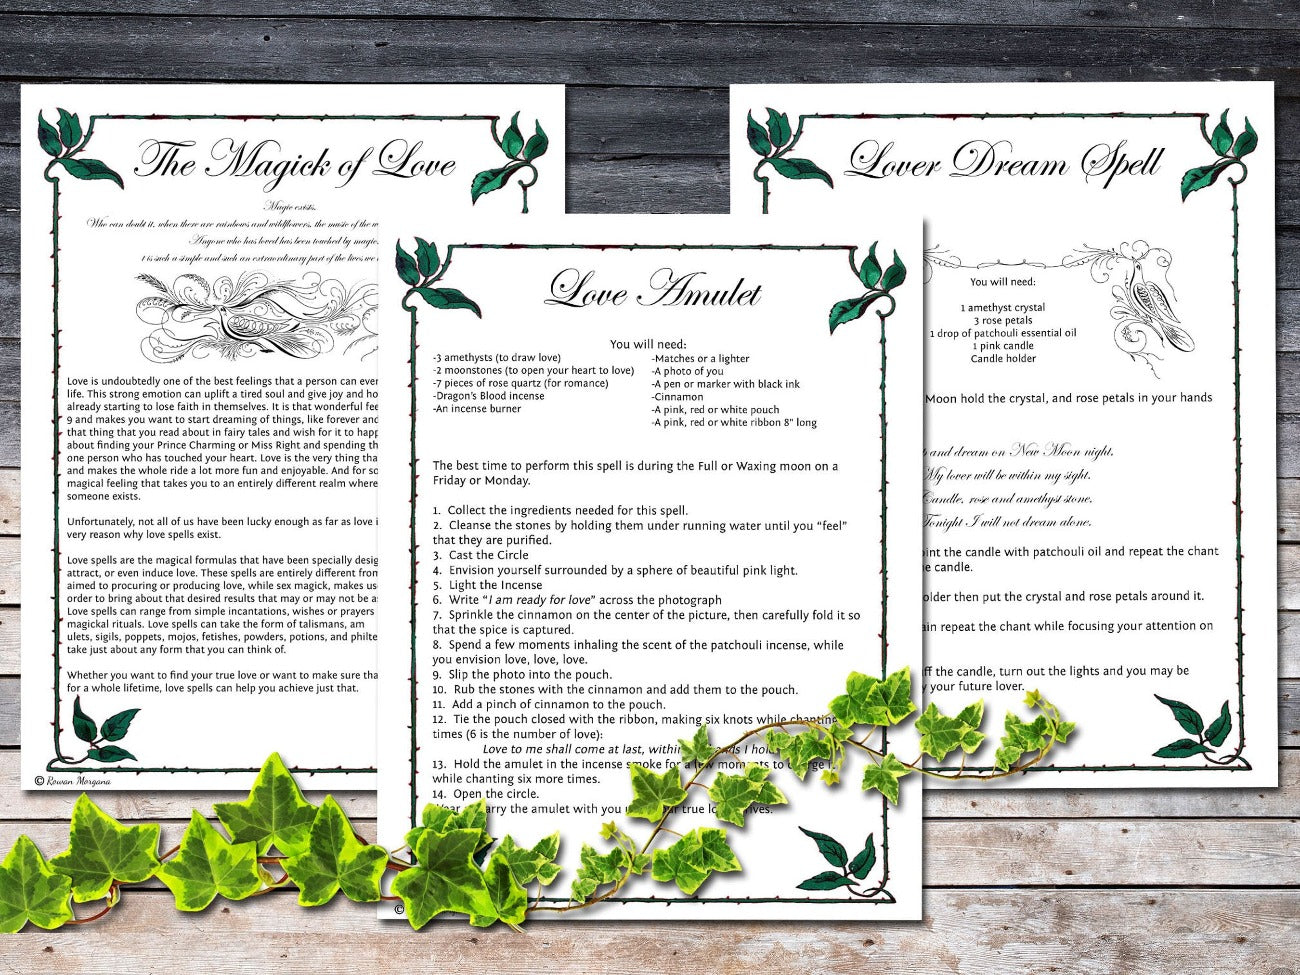 LOVE MAGICK BUNDLE 3 pages, The Magick of Love, Love Amulet, Lover Dream Spell - Morgana Magick Spell